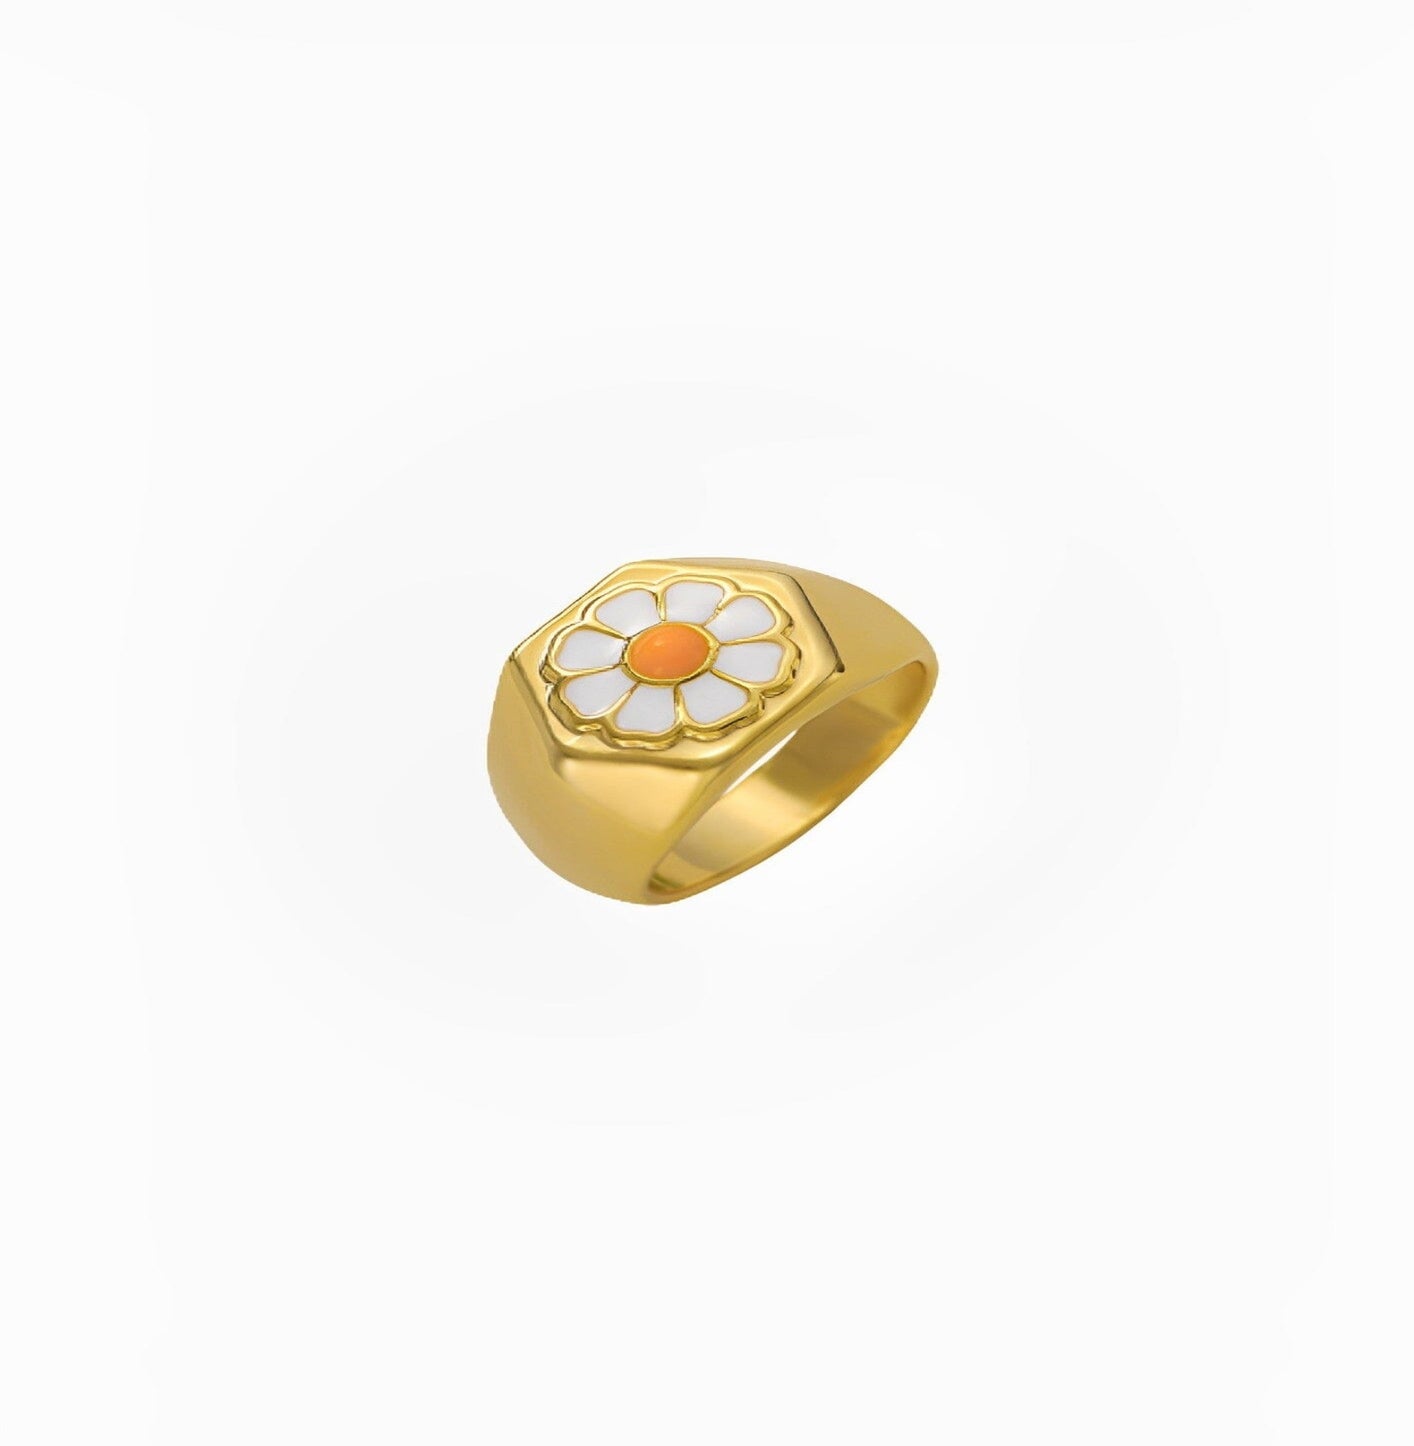 FLOWER RING earing Yubama Jewelry Online Store - The Elegant Designs of Gold and Silver ! 